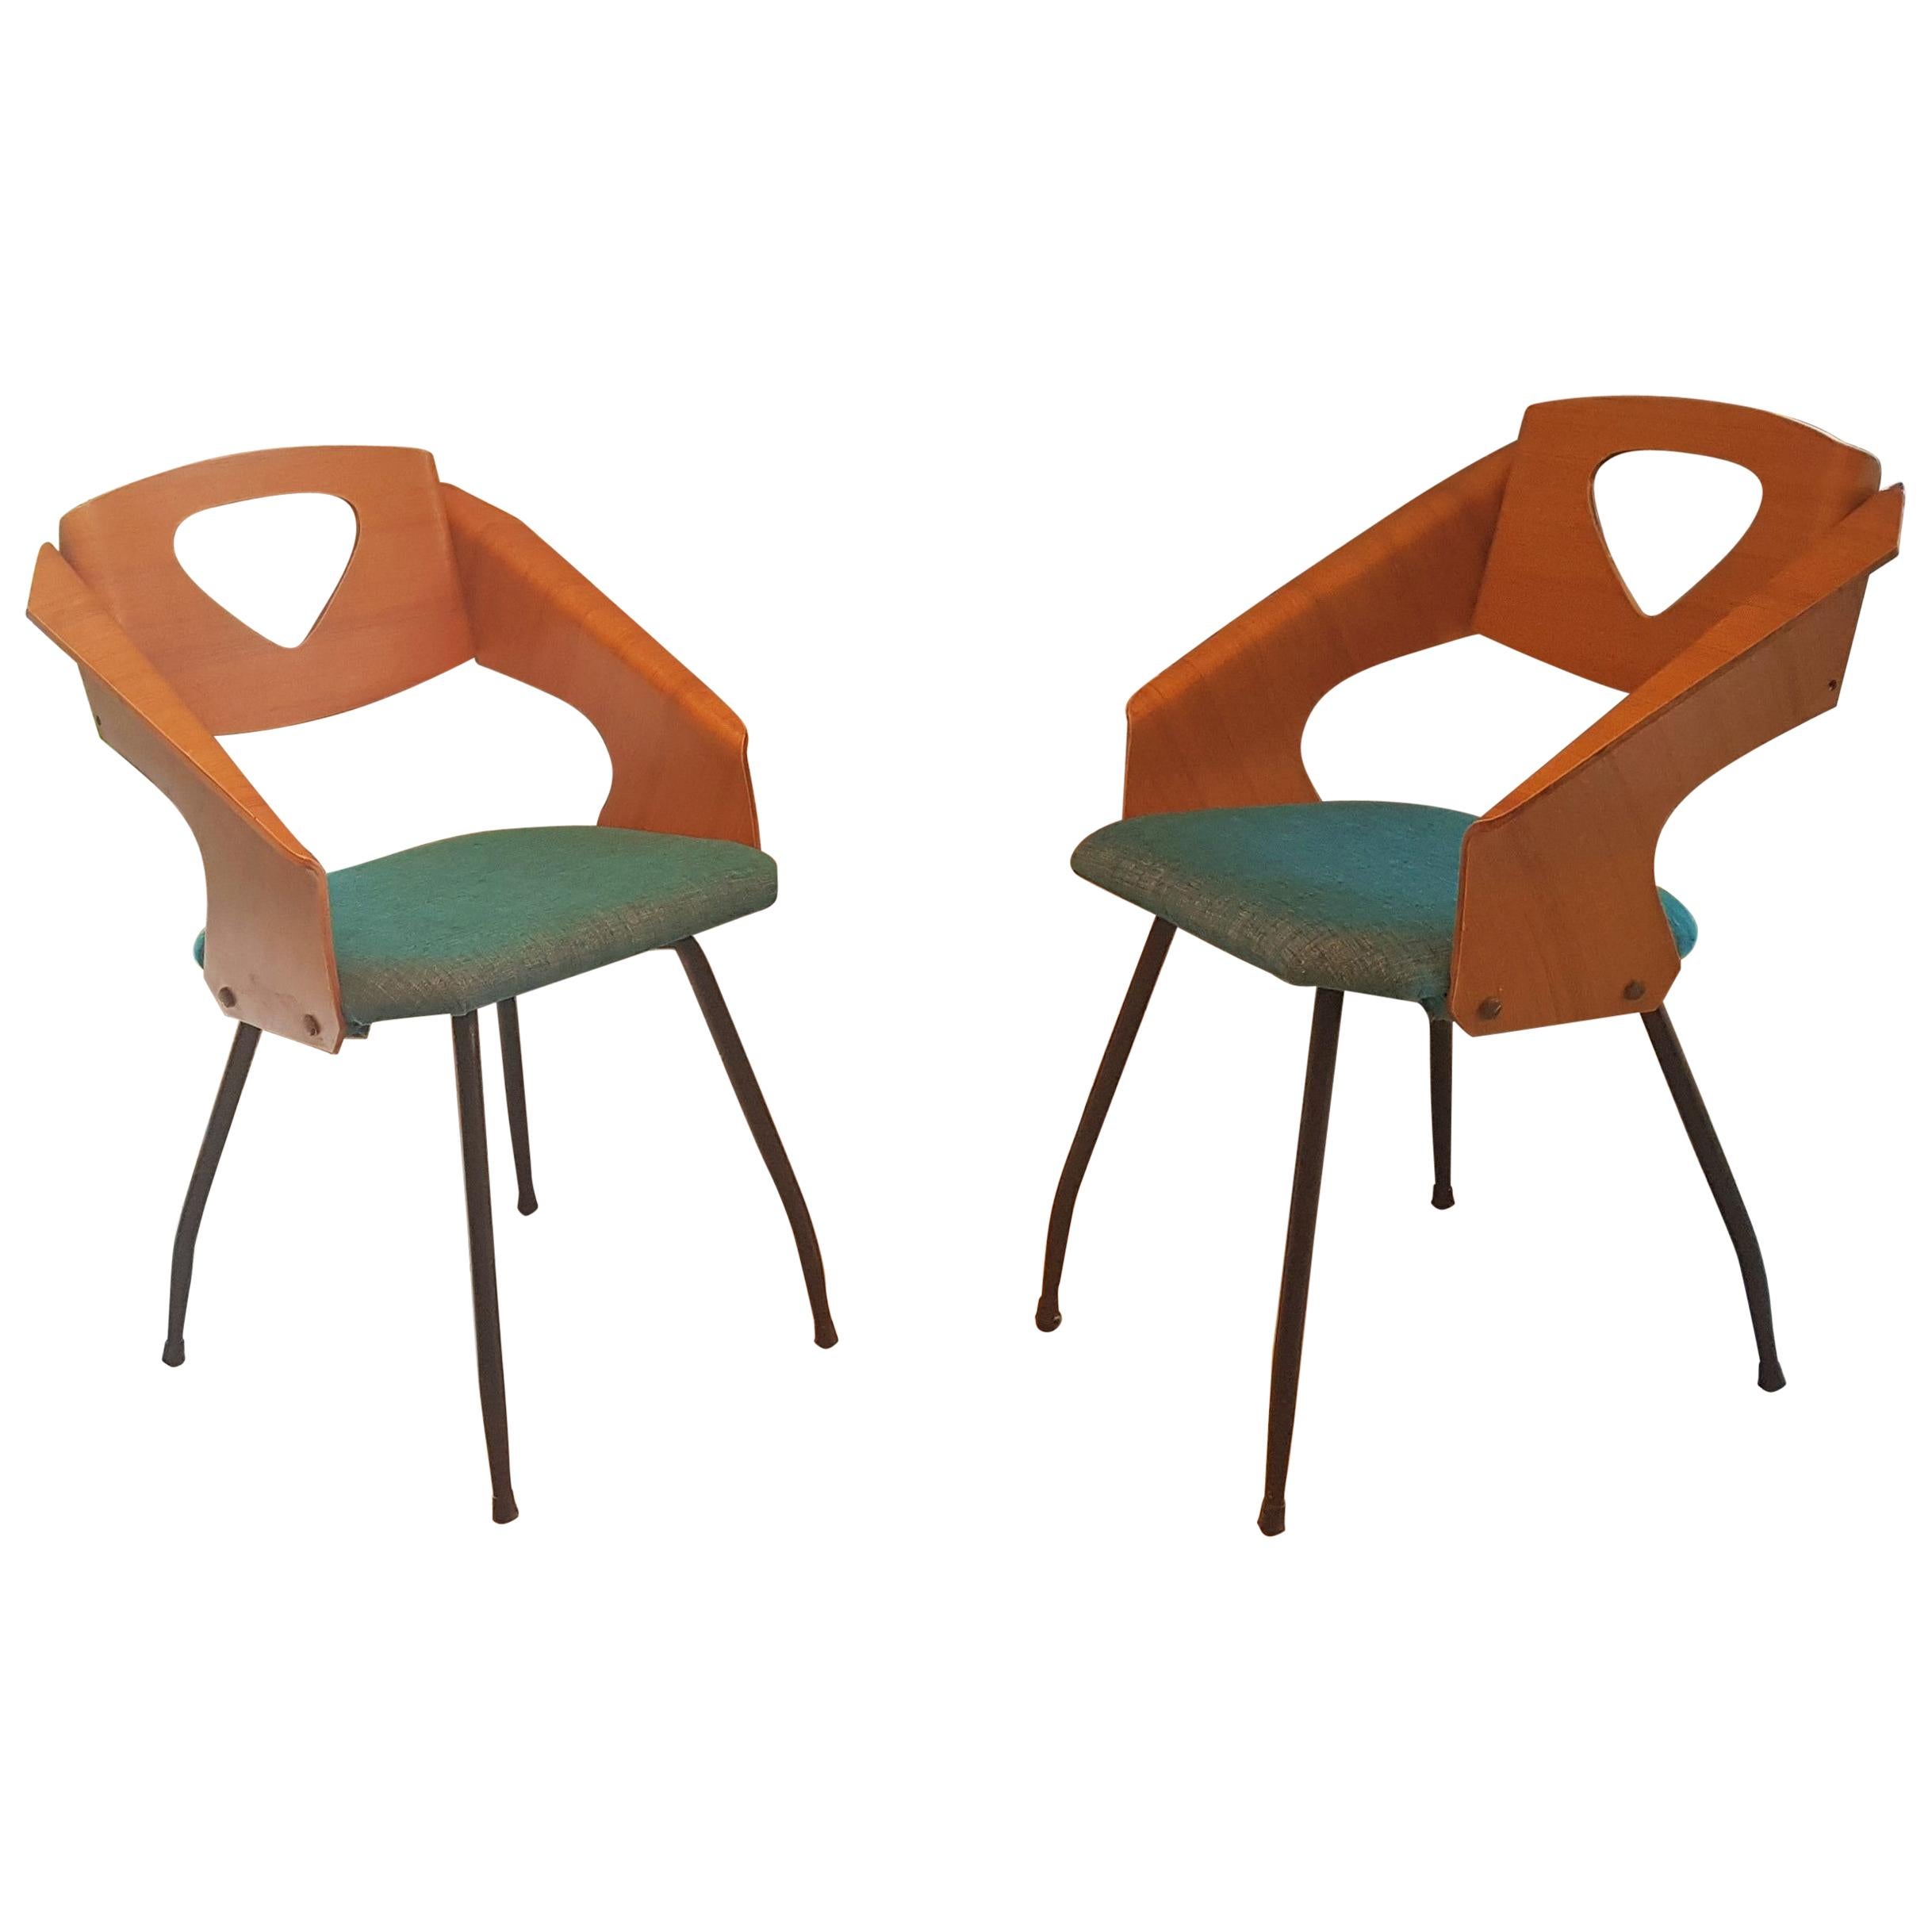 Pair of Midcentury Bentwood Chairs Carlo Ratti for Legni Curvi, Italy, 1950s